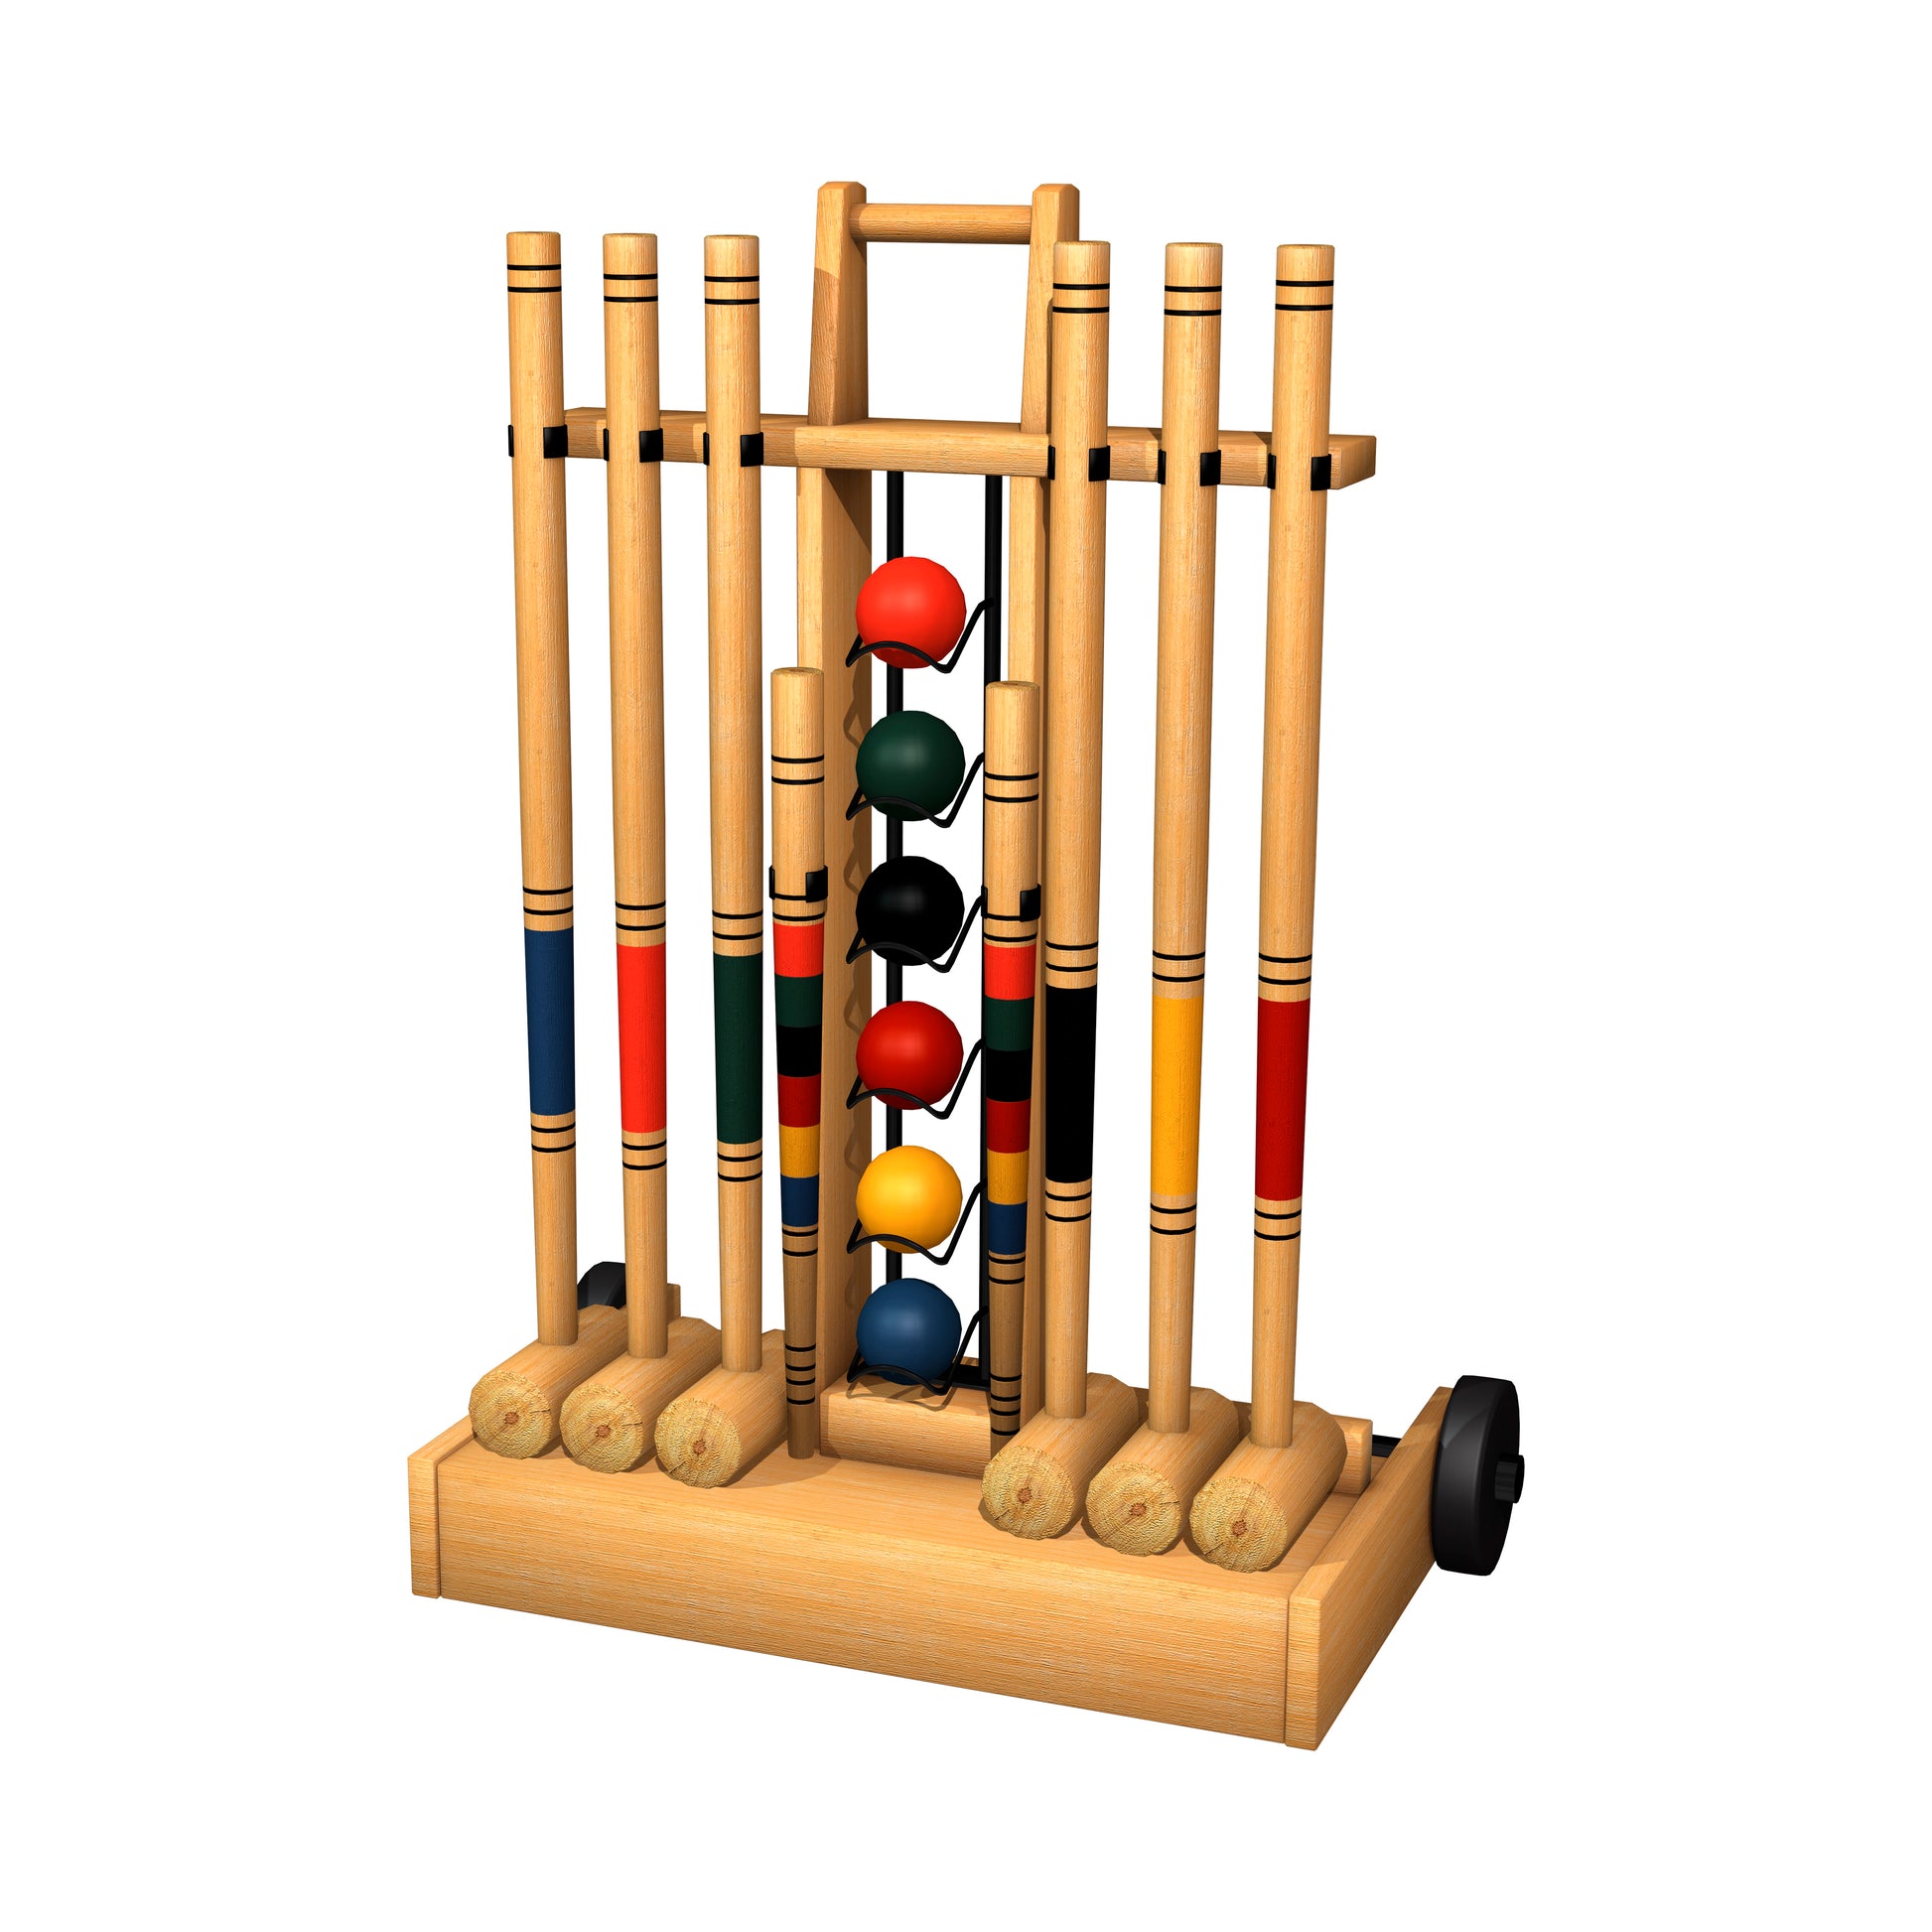 A wooden croquet set in a wooden stand. Contains six croquet batons and balls.